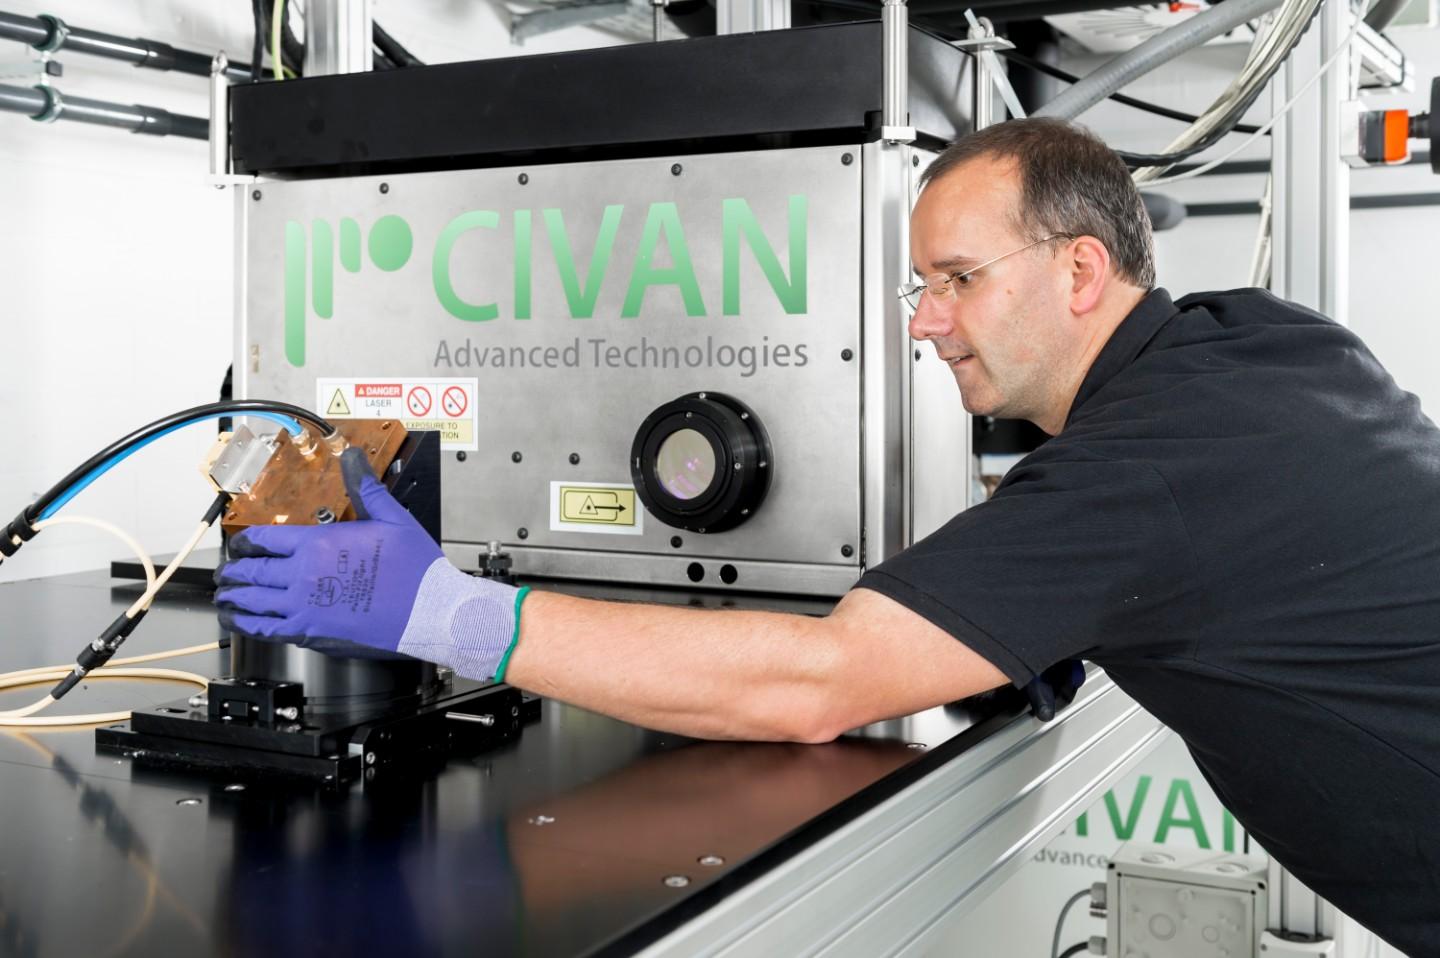 A Fraunhofer IWS researcher setting up the new Civan Dynamic Beam Shaping laser. 